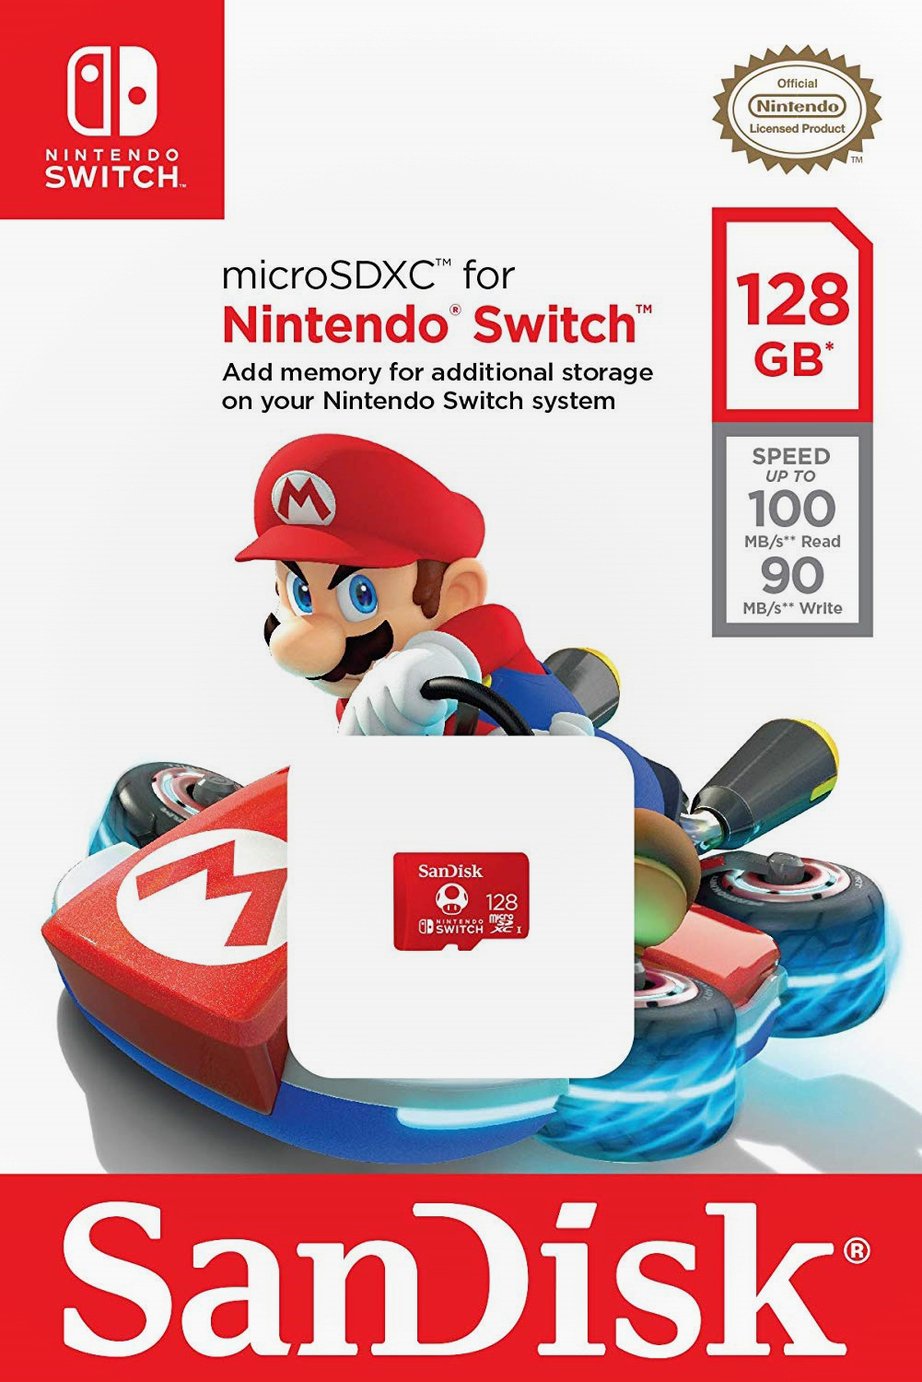 does a micro sd card come with the nintendo switch